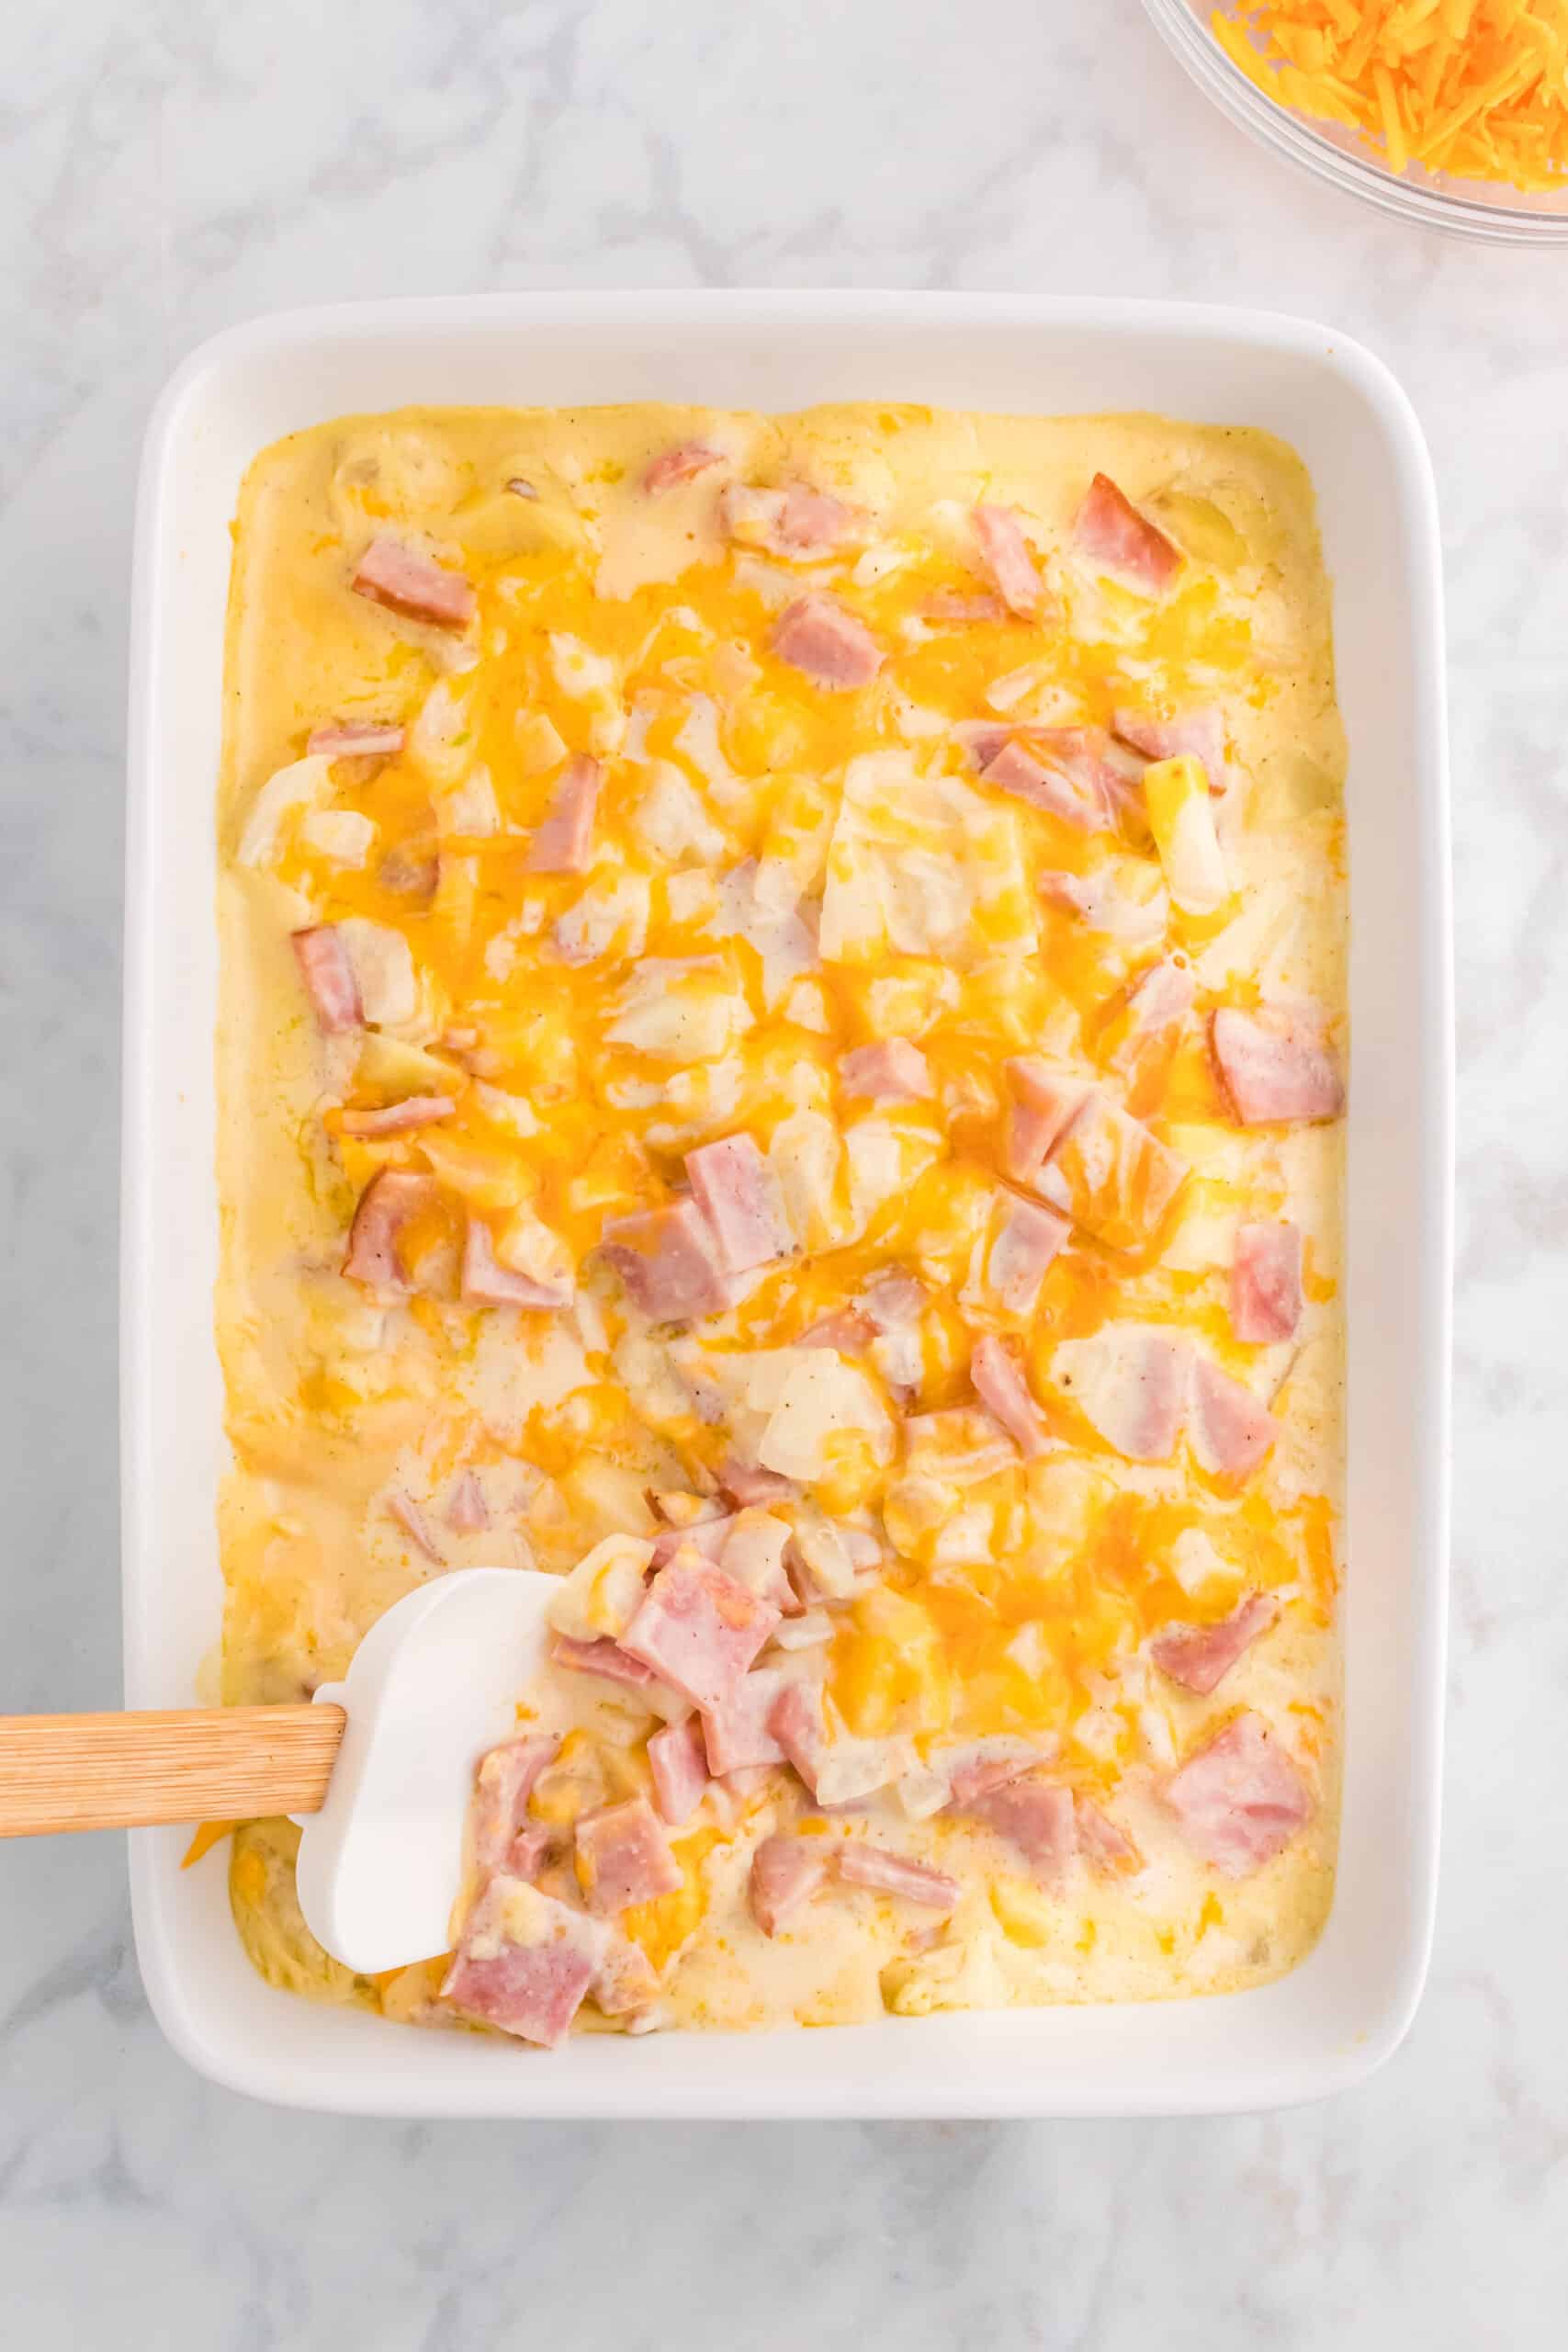 ham, potato and cheesy casserole ingredients being stirred in a baking dish